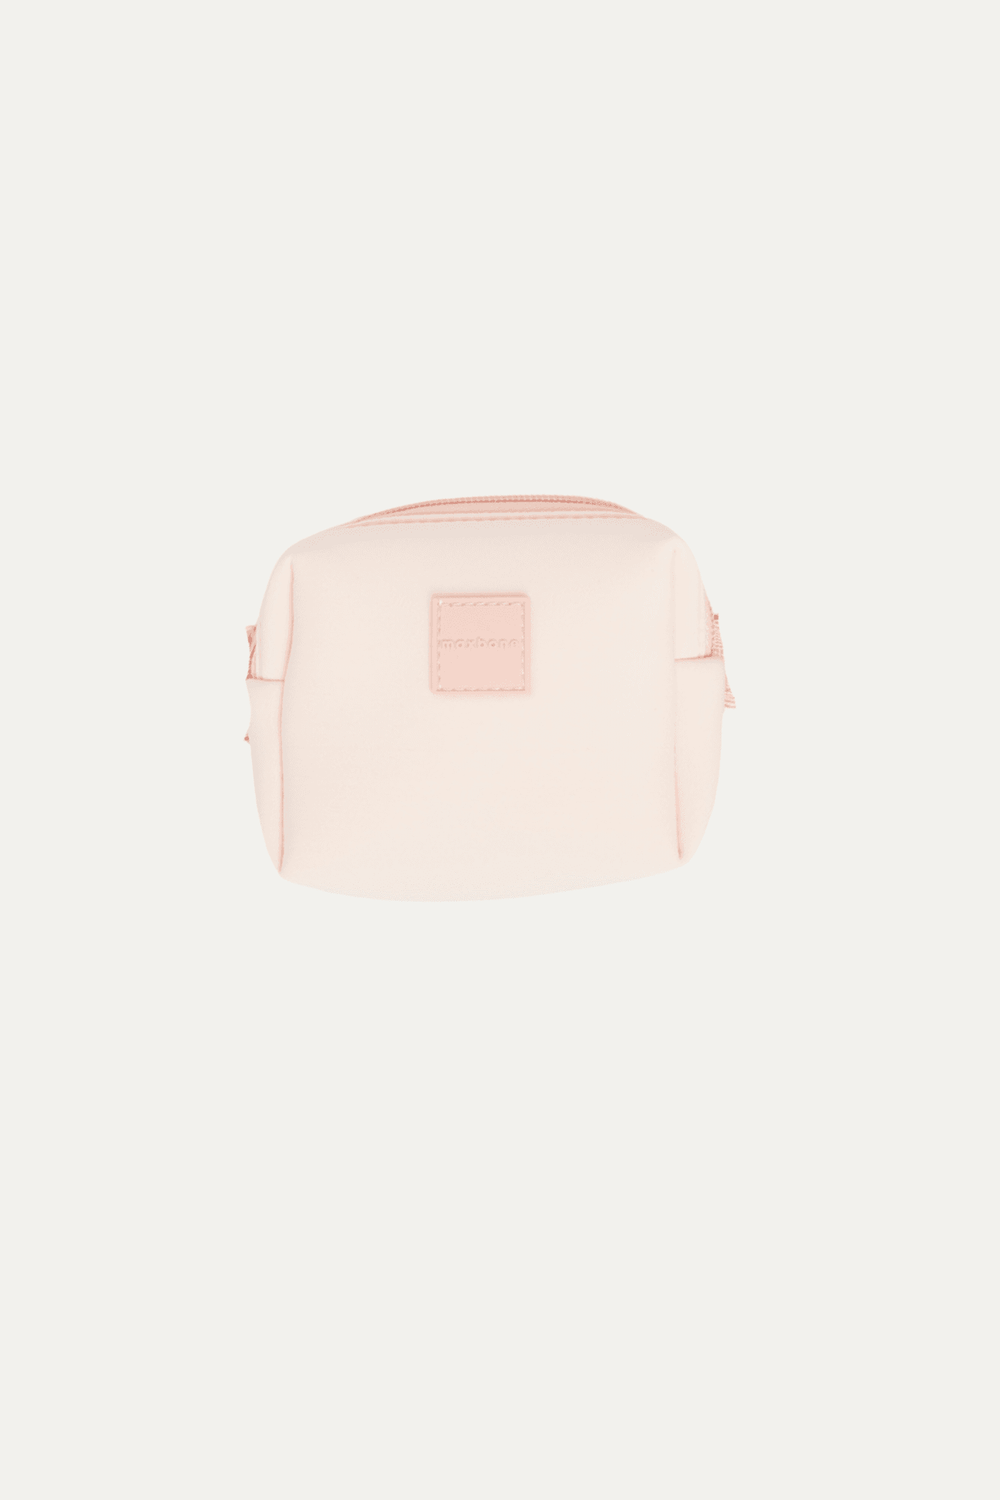 Go with Ease Pouch: Small / Peach